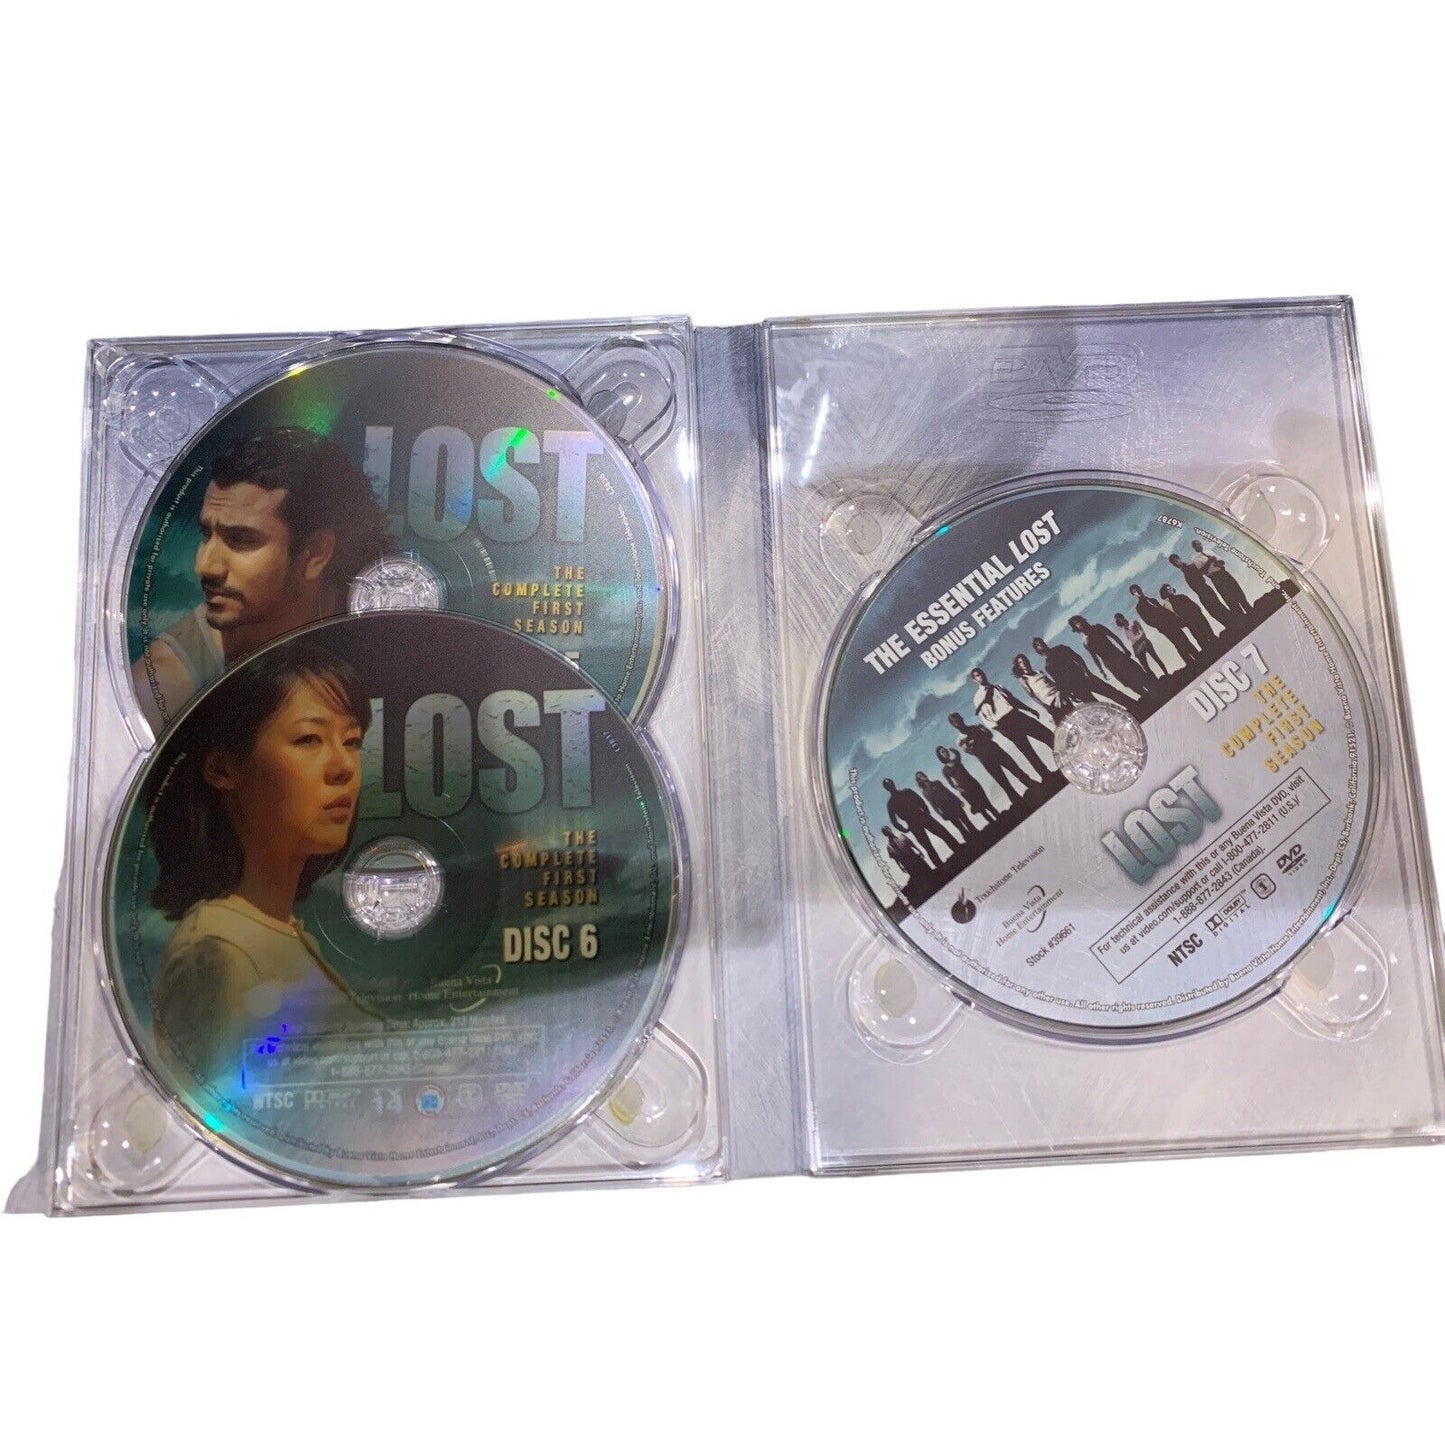 Lost: The Complete First Season (DVD, 2004)